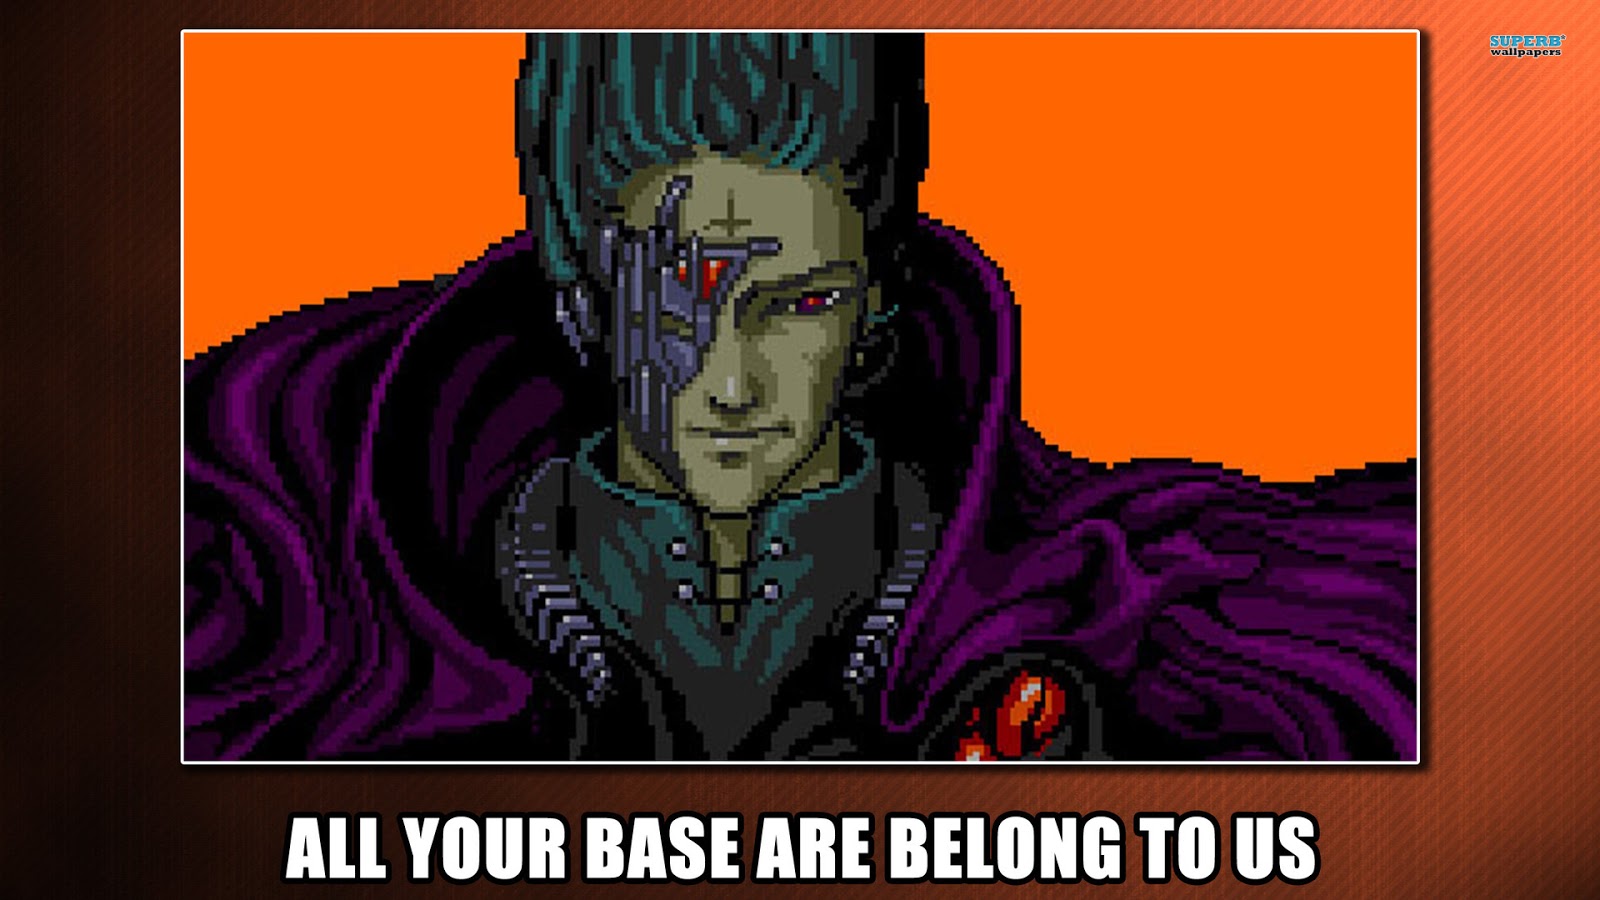 all-your-base-are-belong-to-us-9009-1920x1080+(1).jpg